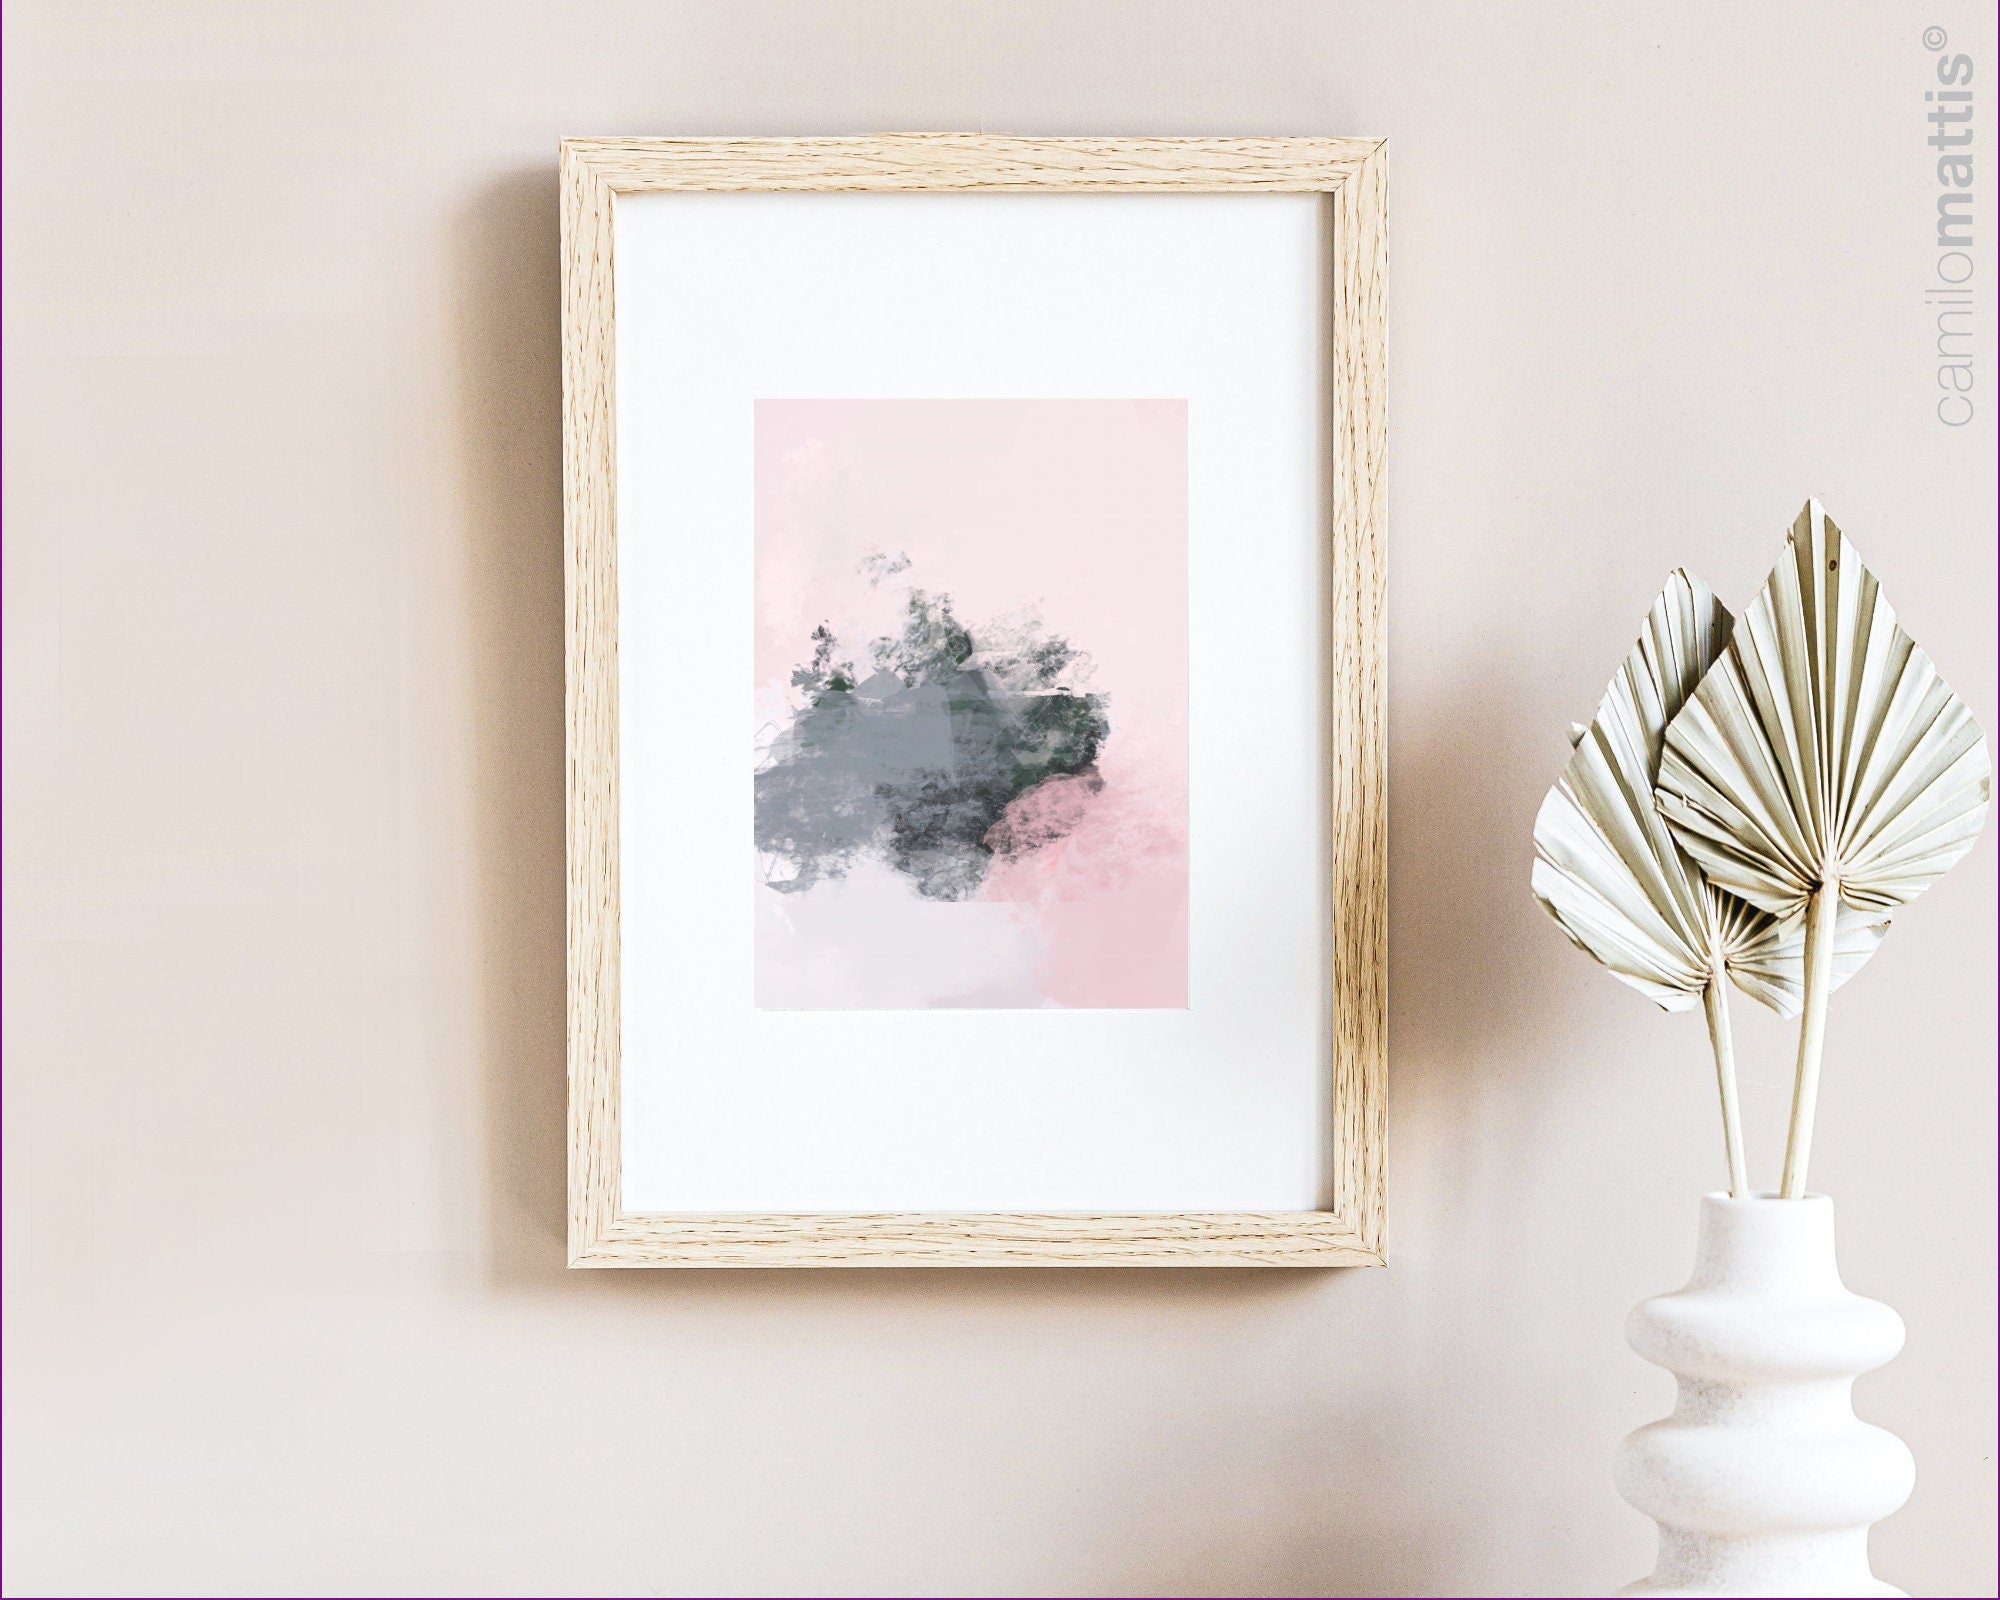 Blush pink and grey brush strokes extra large wall art 24x36 art prints, Comfort colors apartment decor